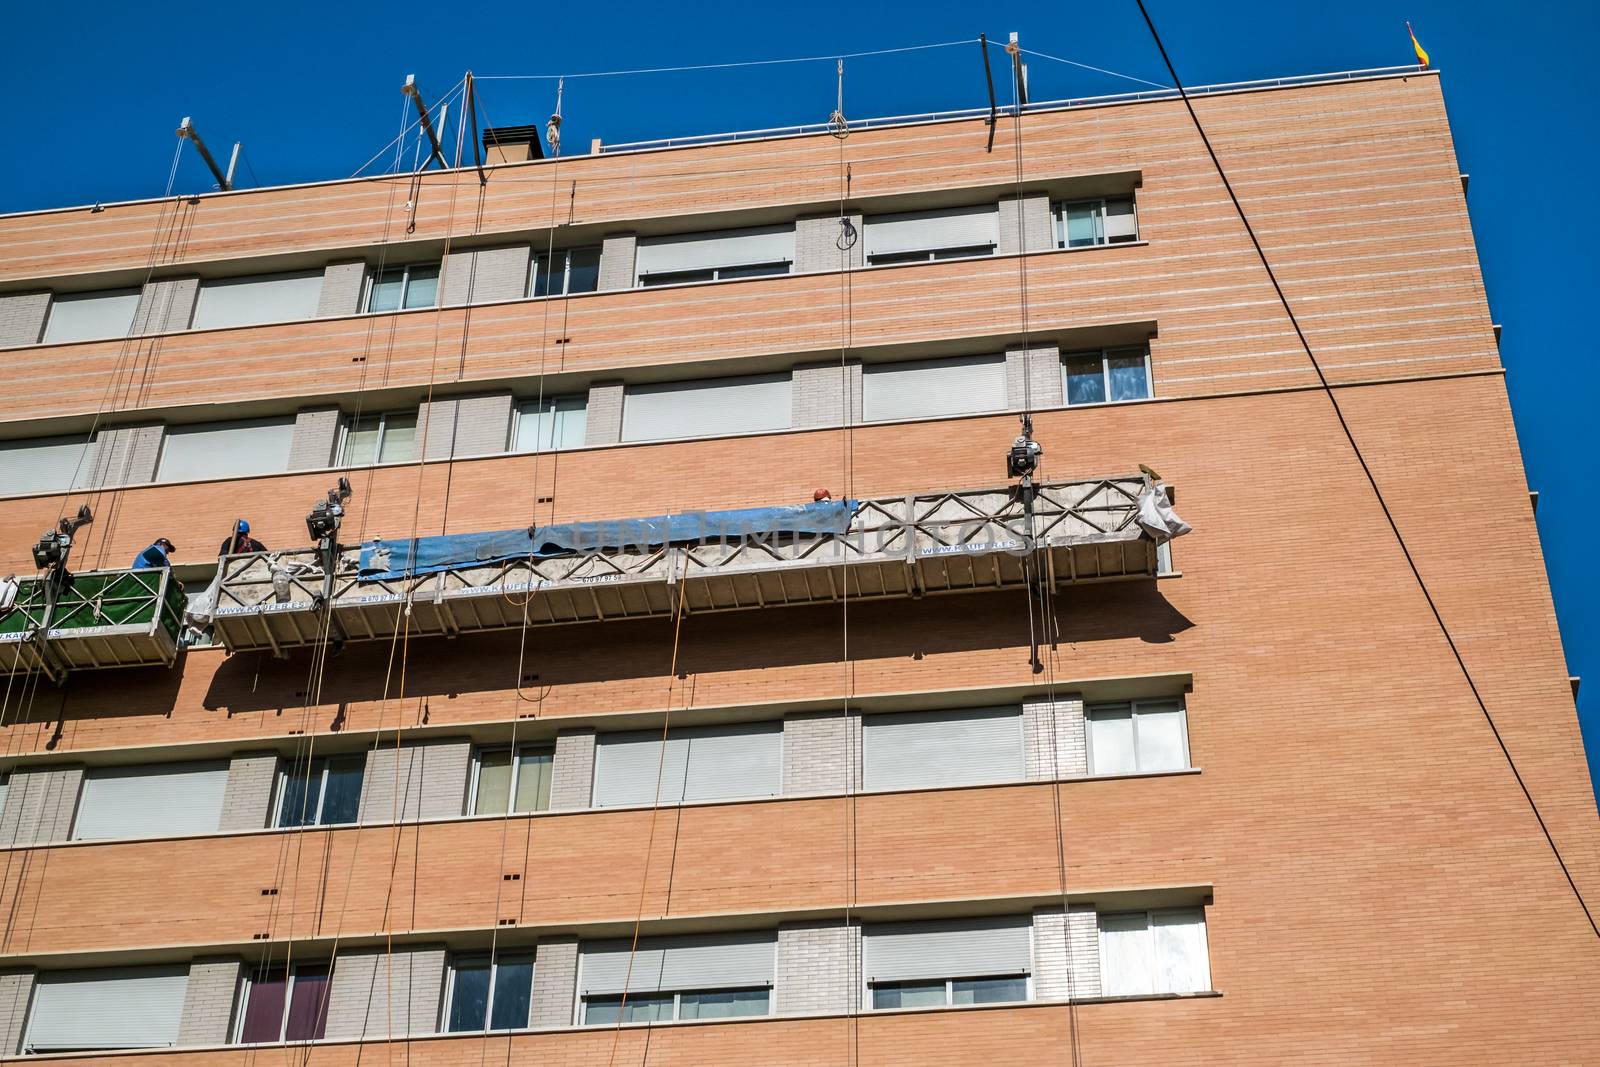 workers on the exterior scaffold elevator to repair the building by Roberto